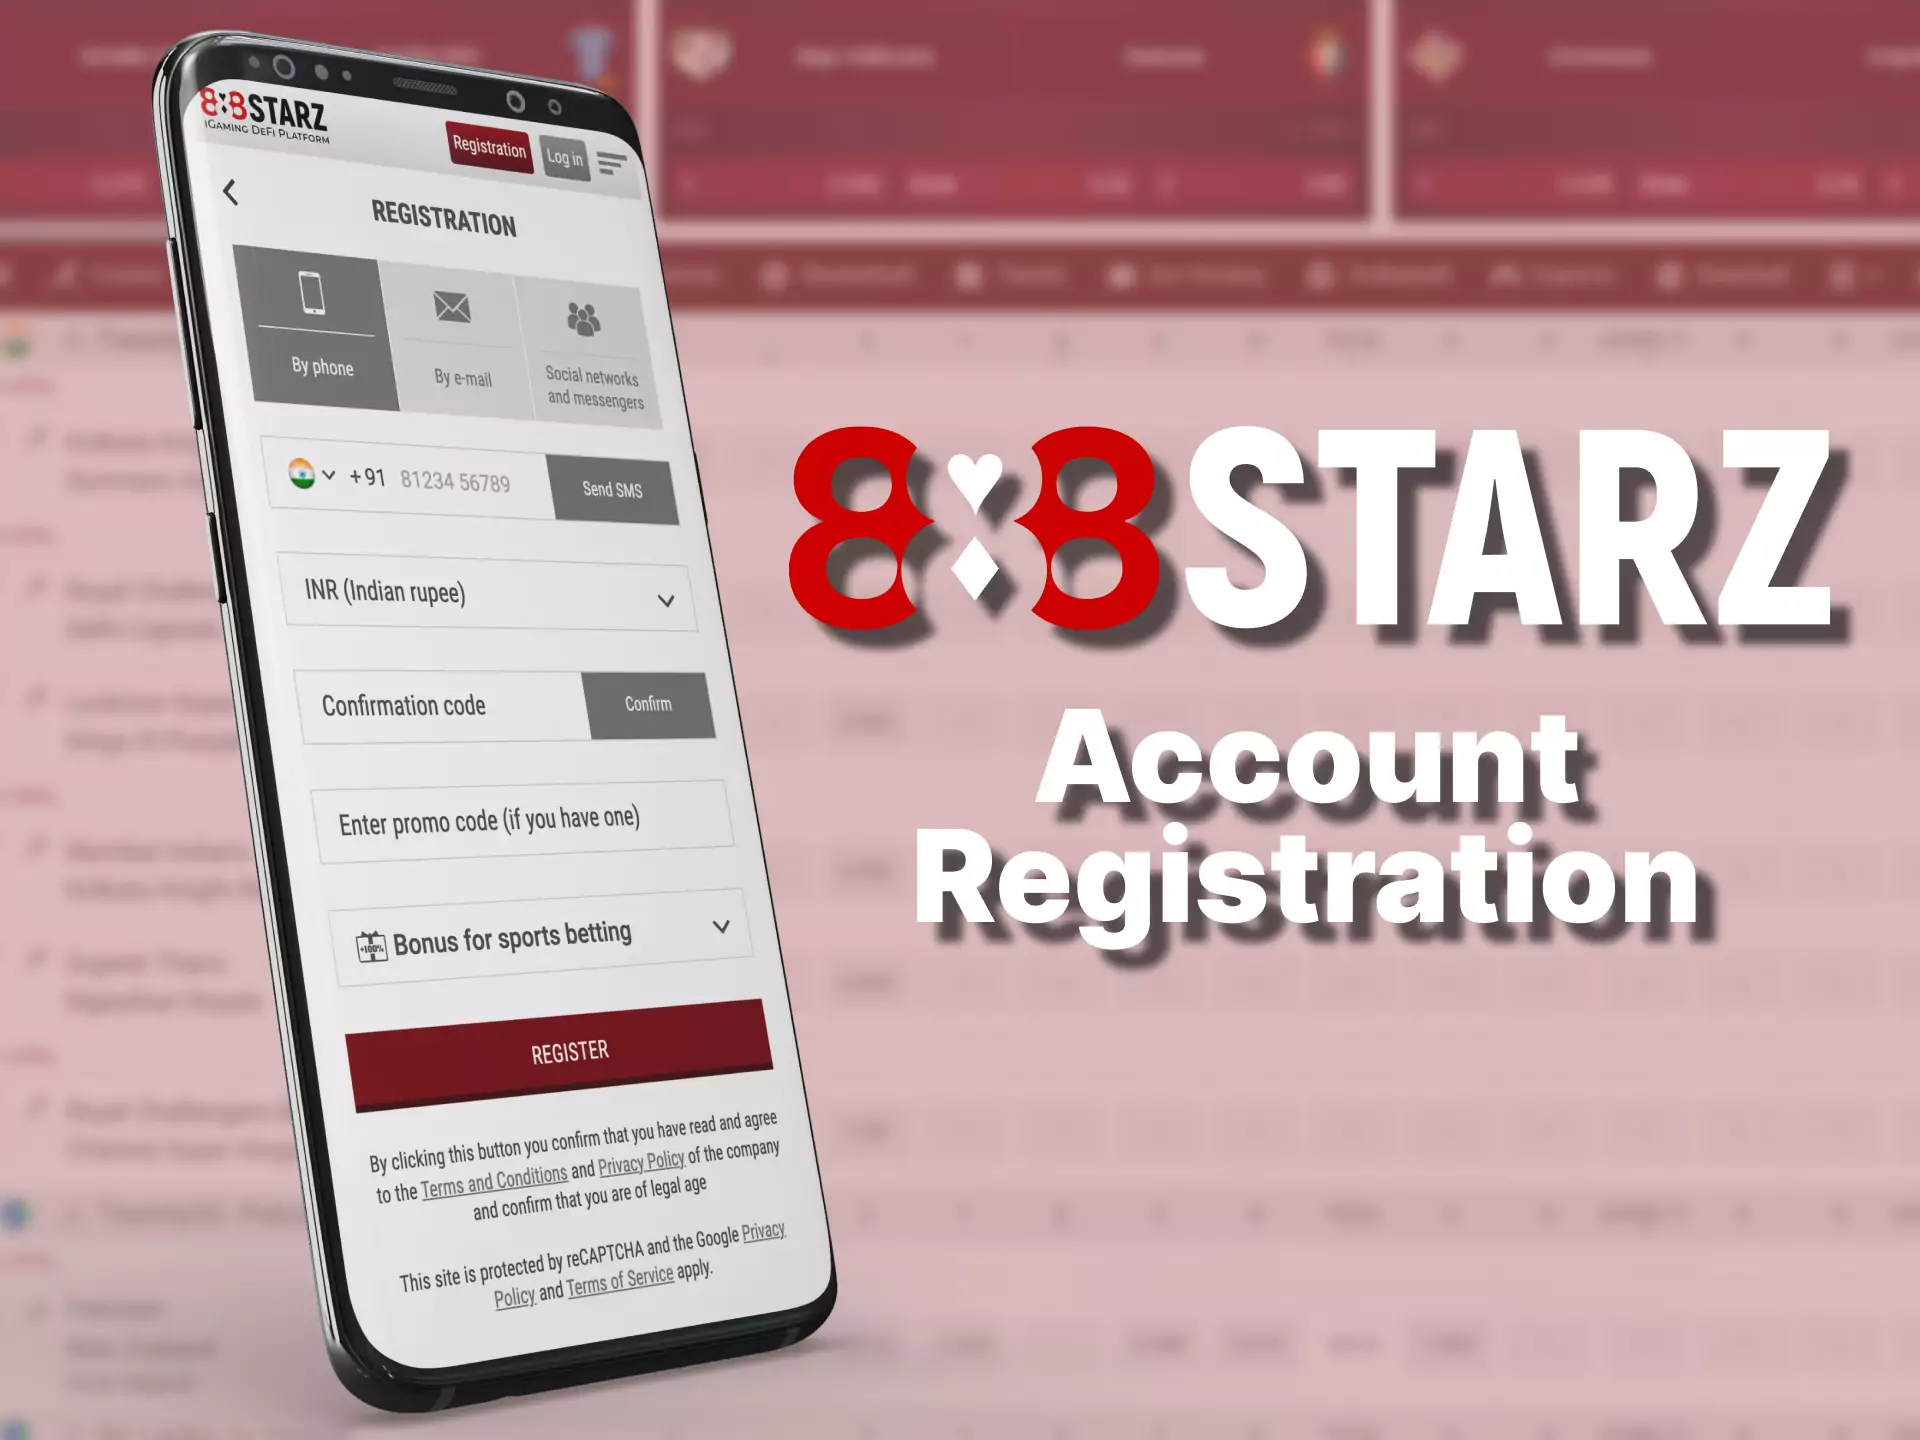 Complete a quick and easy registration on the 888starz app to bet on sports and play casino games.